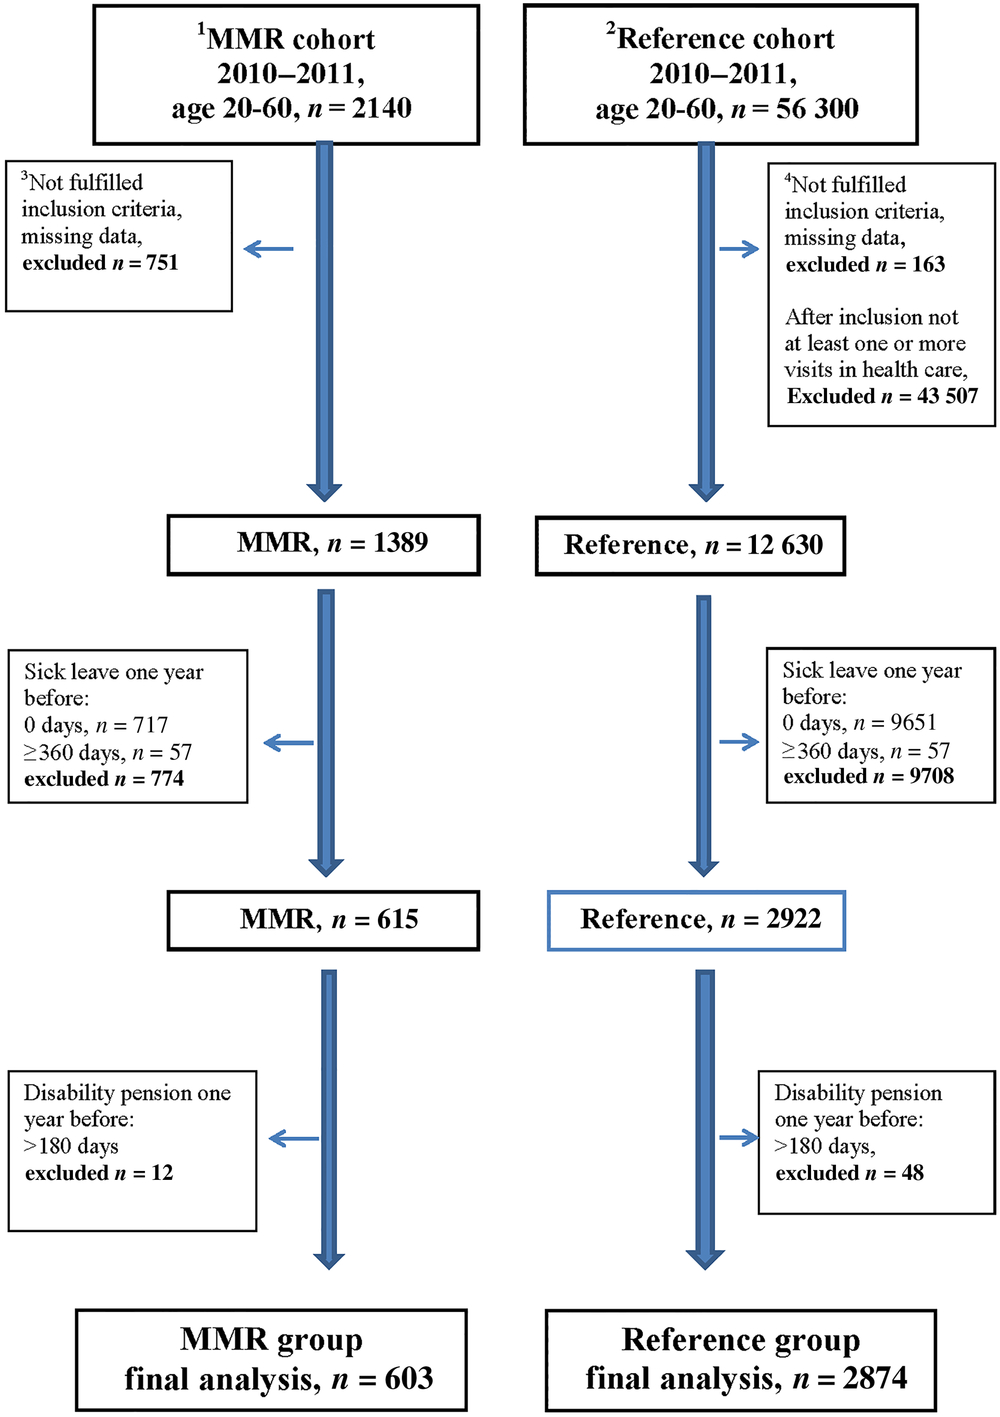 Evaluation Of A Multimodal Pain Rehabilitation Programme In Primary Care Based On Clinical Register Data A Feasibility Study Primary Health Care Research Development Cambridge Core